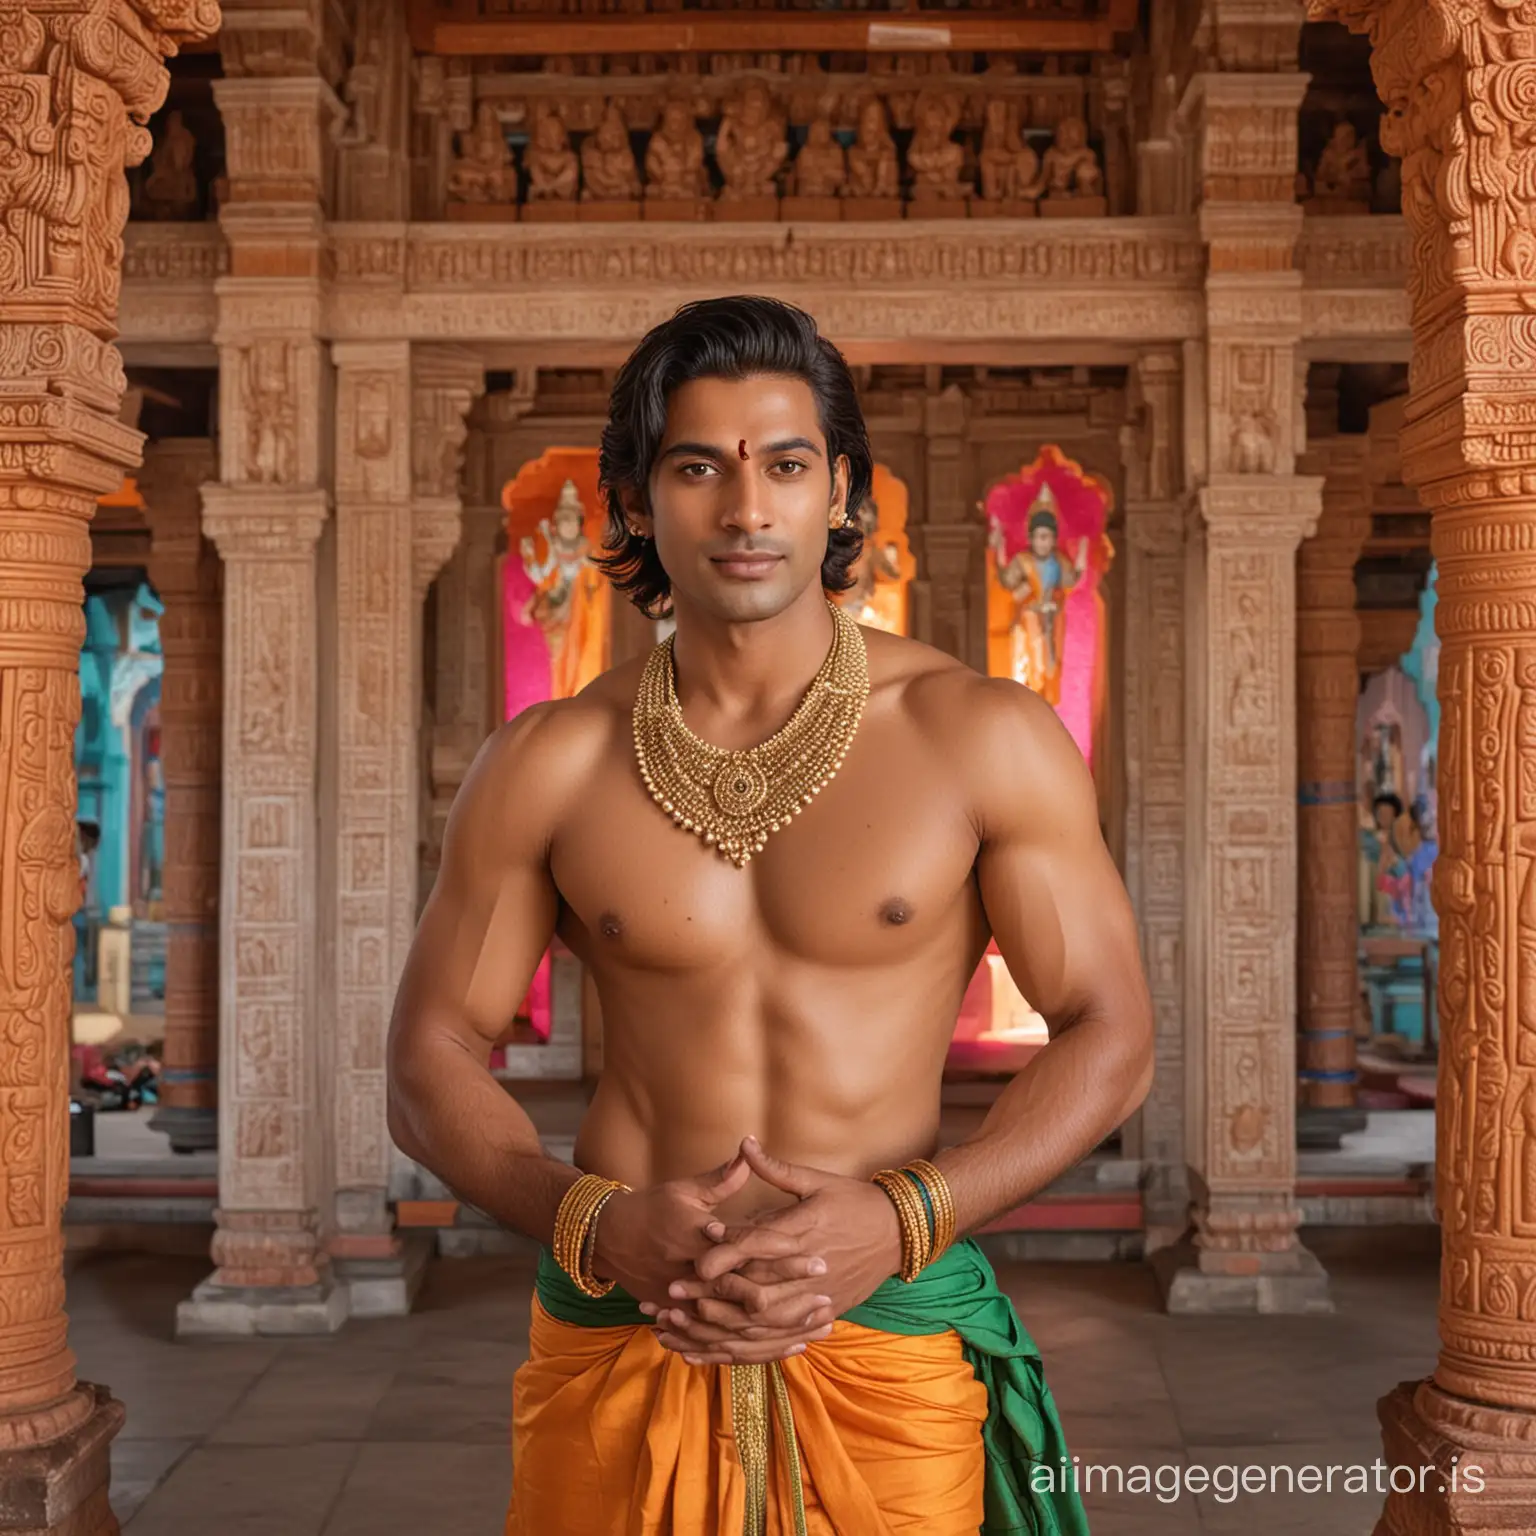 Handsome-Man-in-Short-Hair-Standing-in-Colorful-Radha-Krishna-Temple